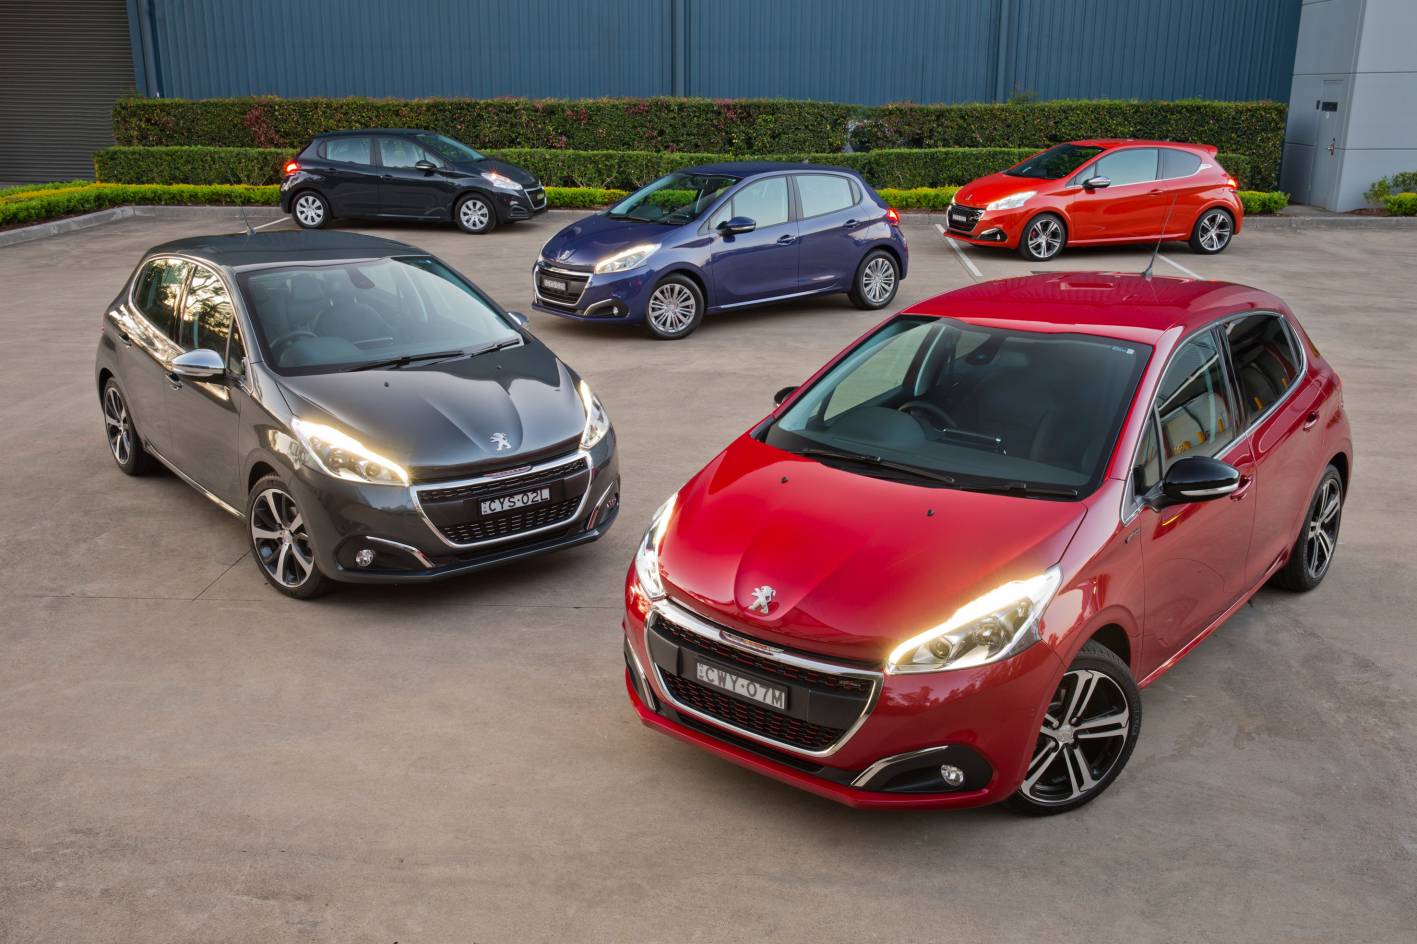 Peugeot 208 updated for 2015, on sale in Australia from $15,990